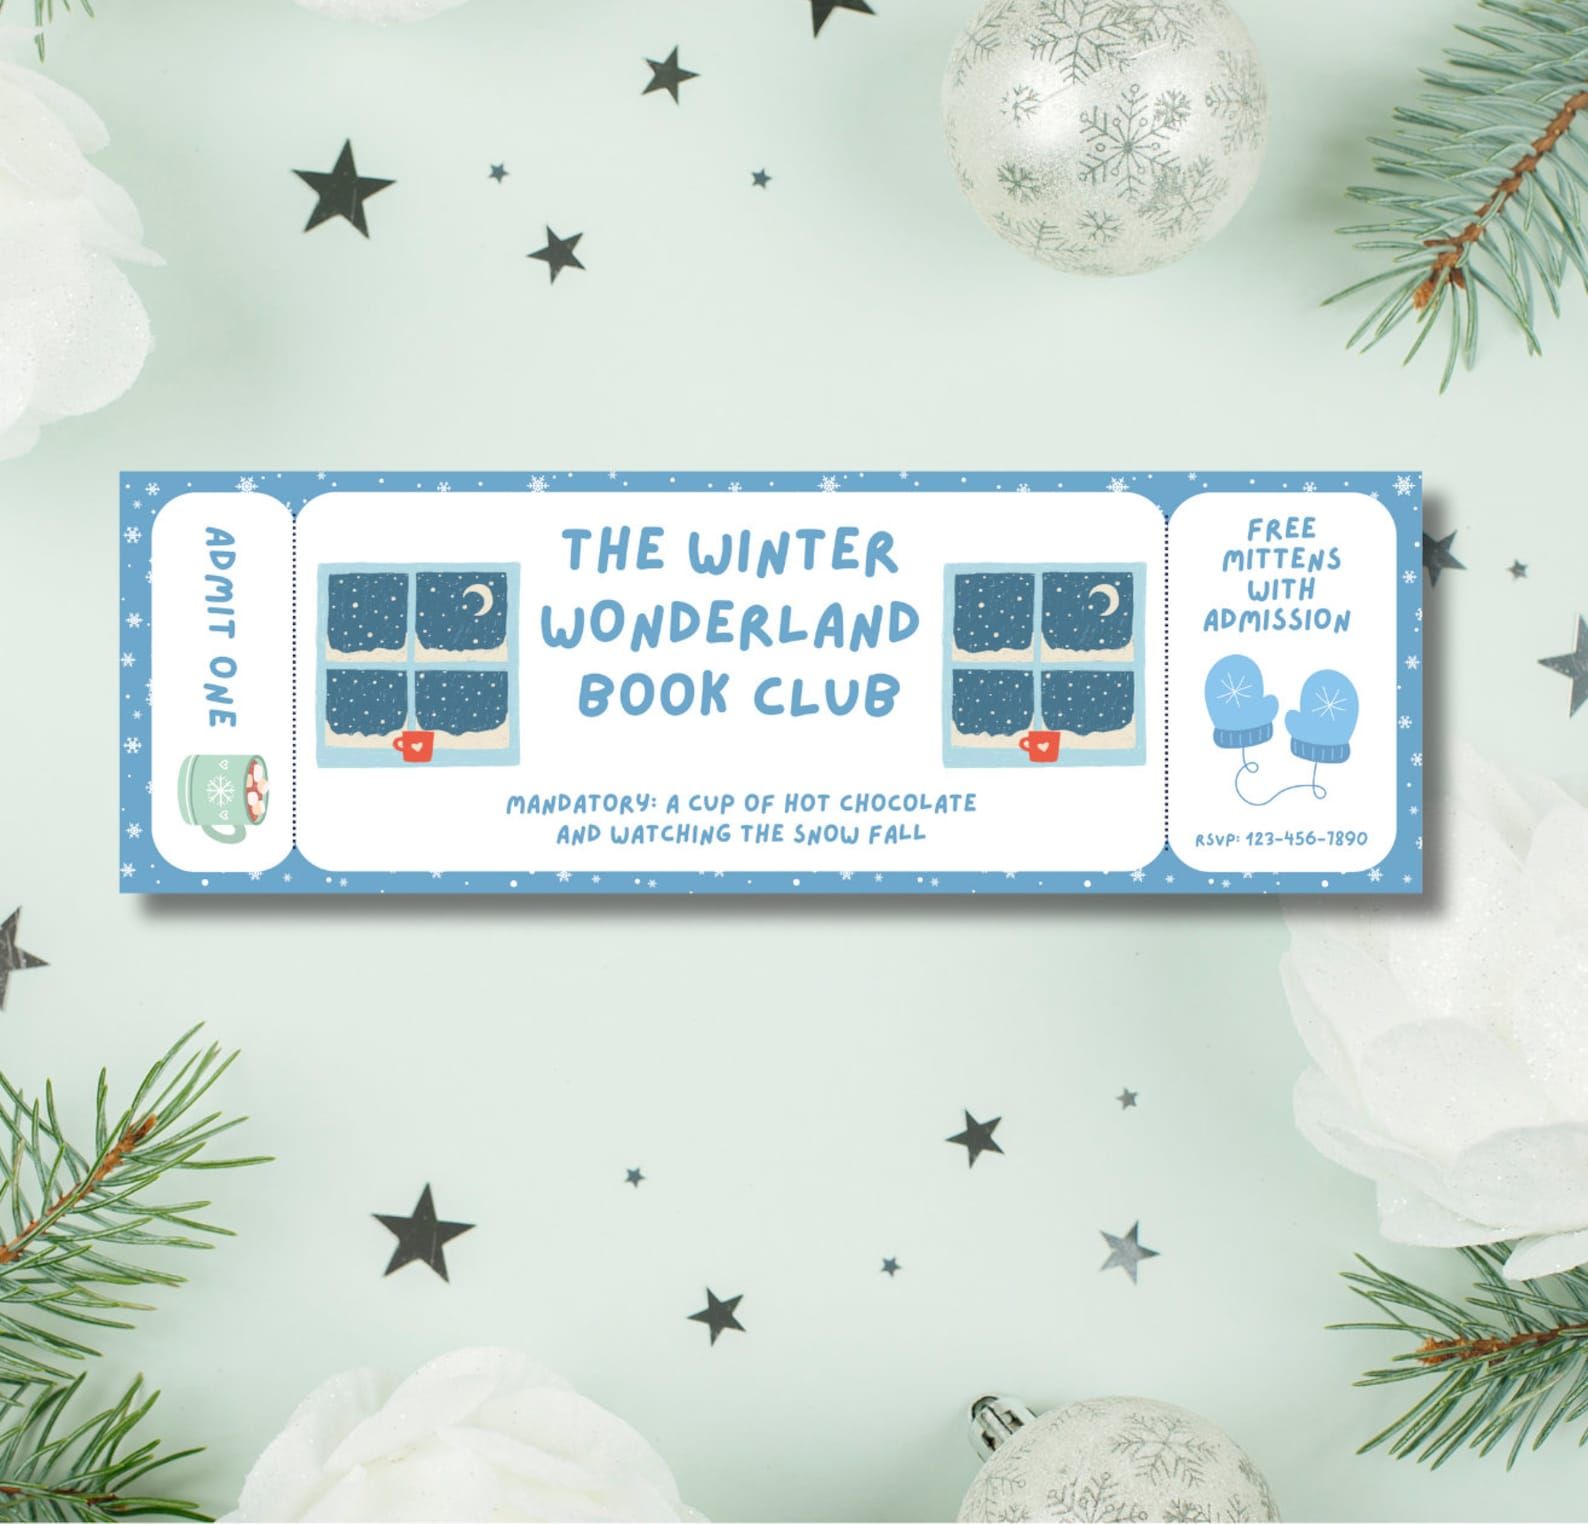 A bookmark designed to look like a ticket to a winter wonderland book club